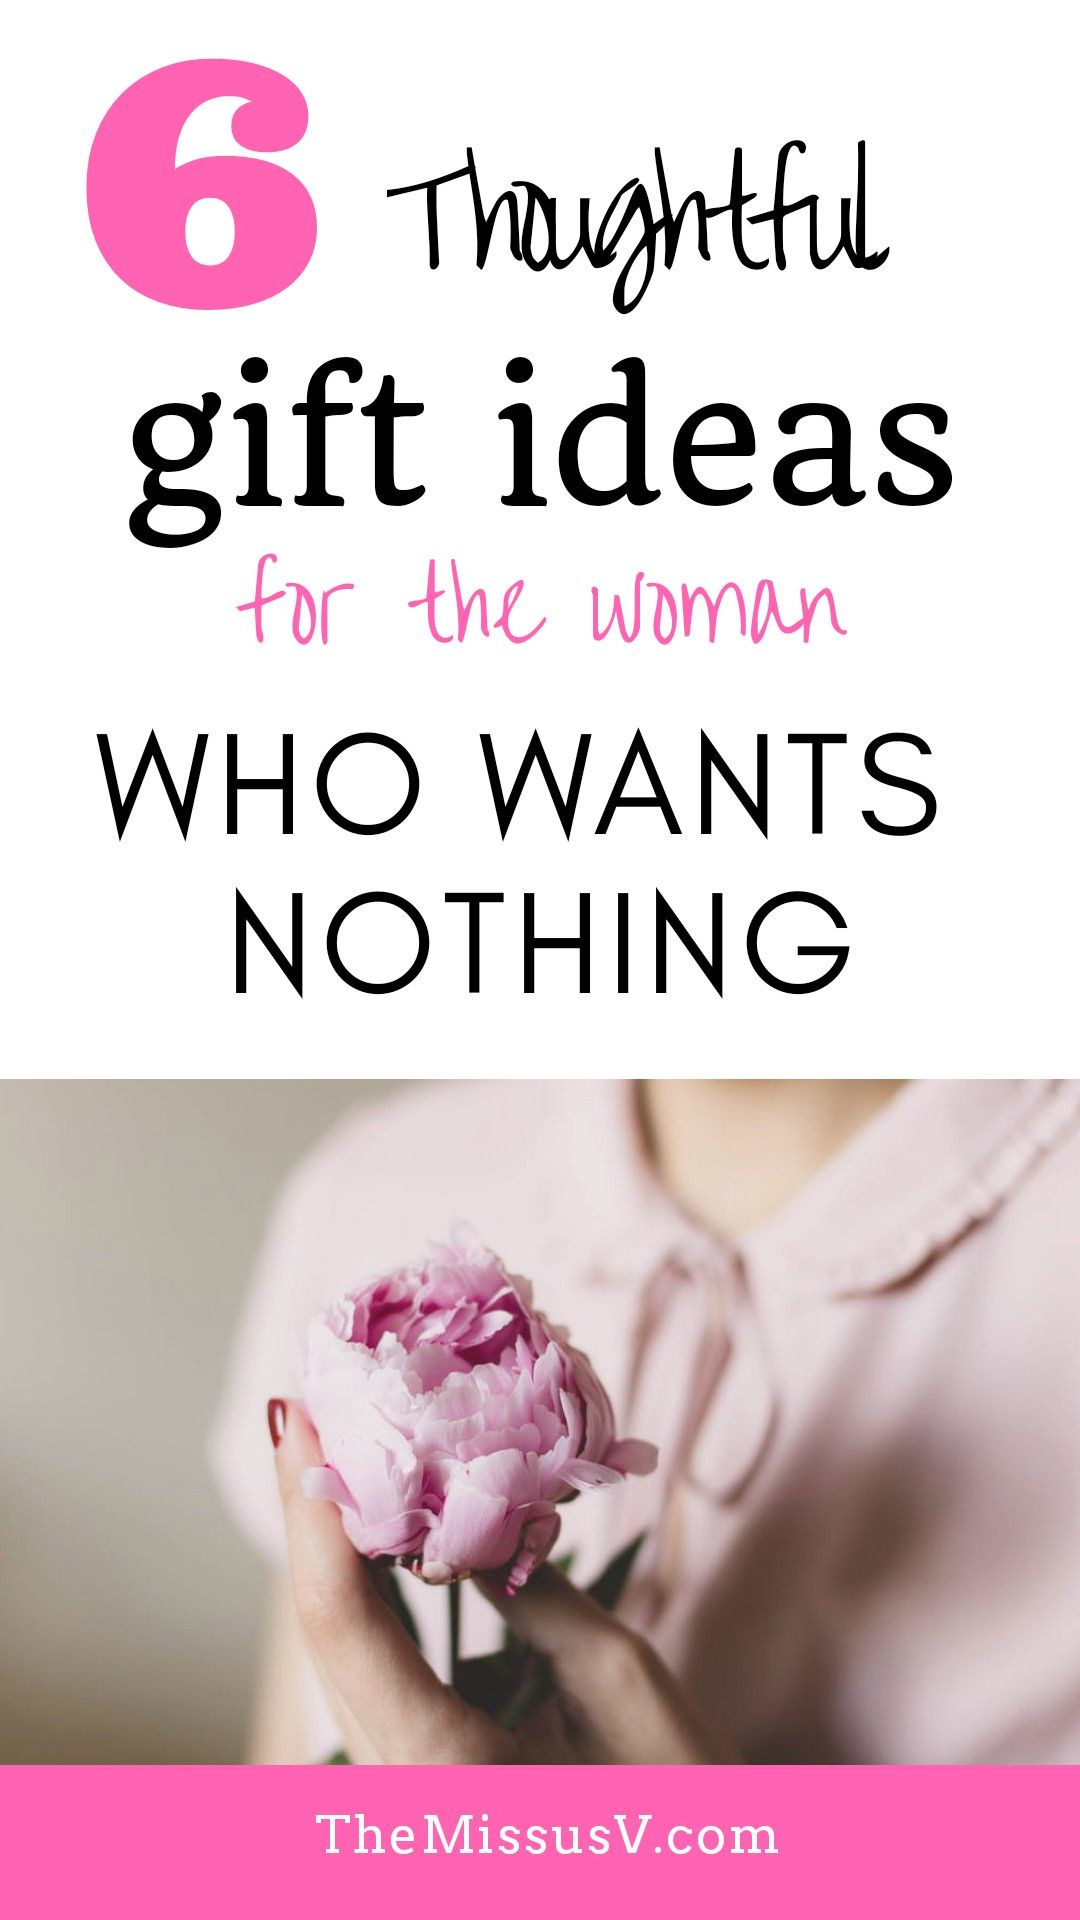 Thoughtful Birthday Gifts
 Thoughtful Gifts for the Woman Who Wants Nothing